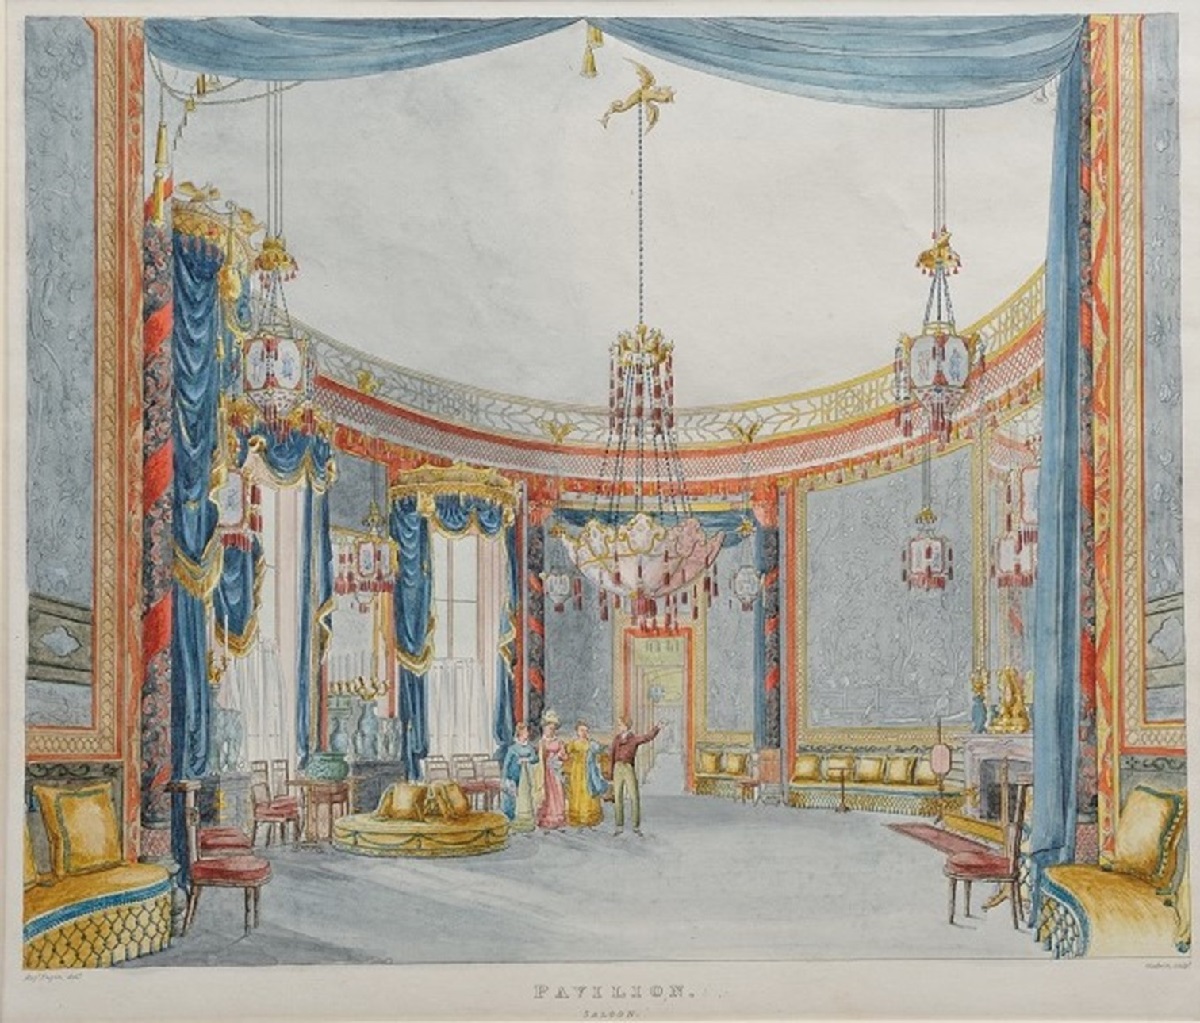 The Saloon in c.1815, decorated with Chinese export wallpaper